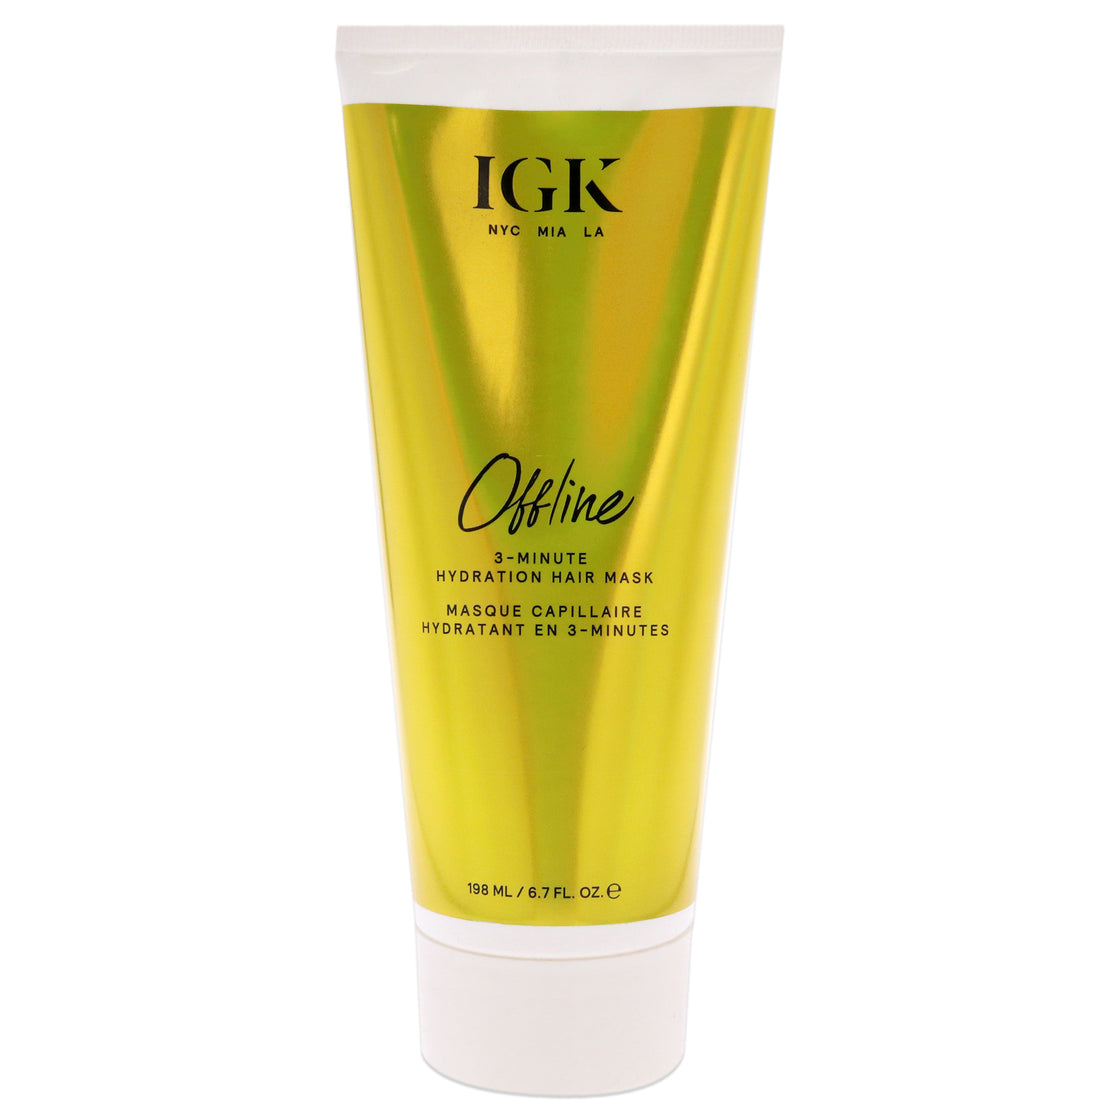 Offline 3 Minute Hydration Hair Mask by IGK for Unisex - 6.7 oz Masque